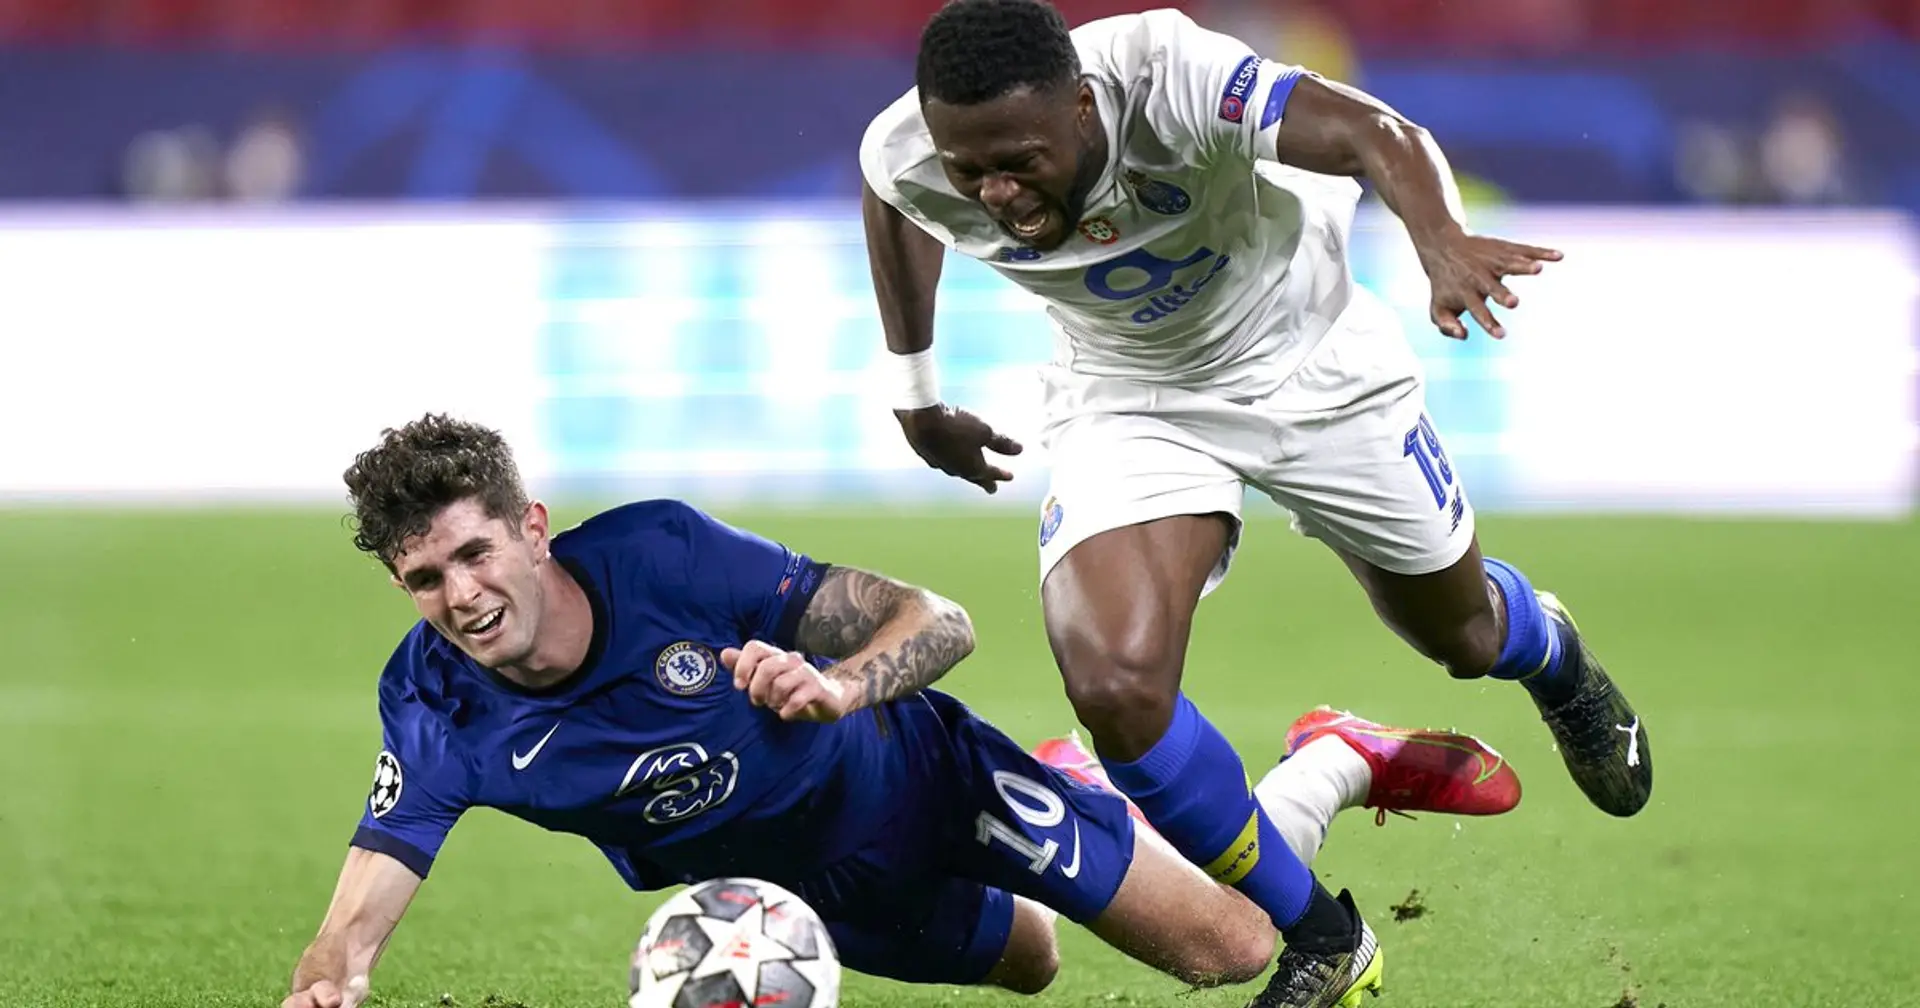 Christian Pulisic draws record number of fouls against in 10 years in Porto game